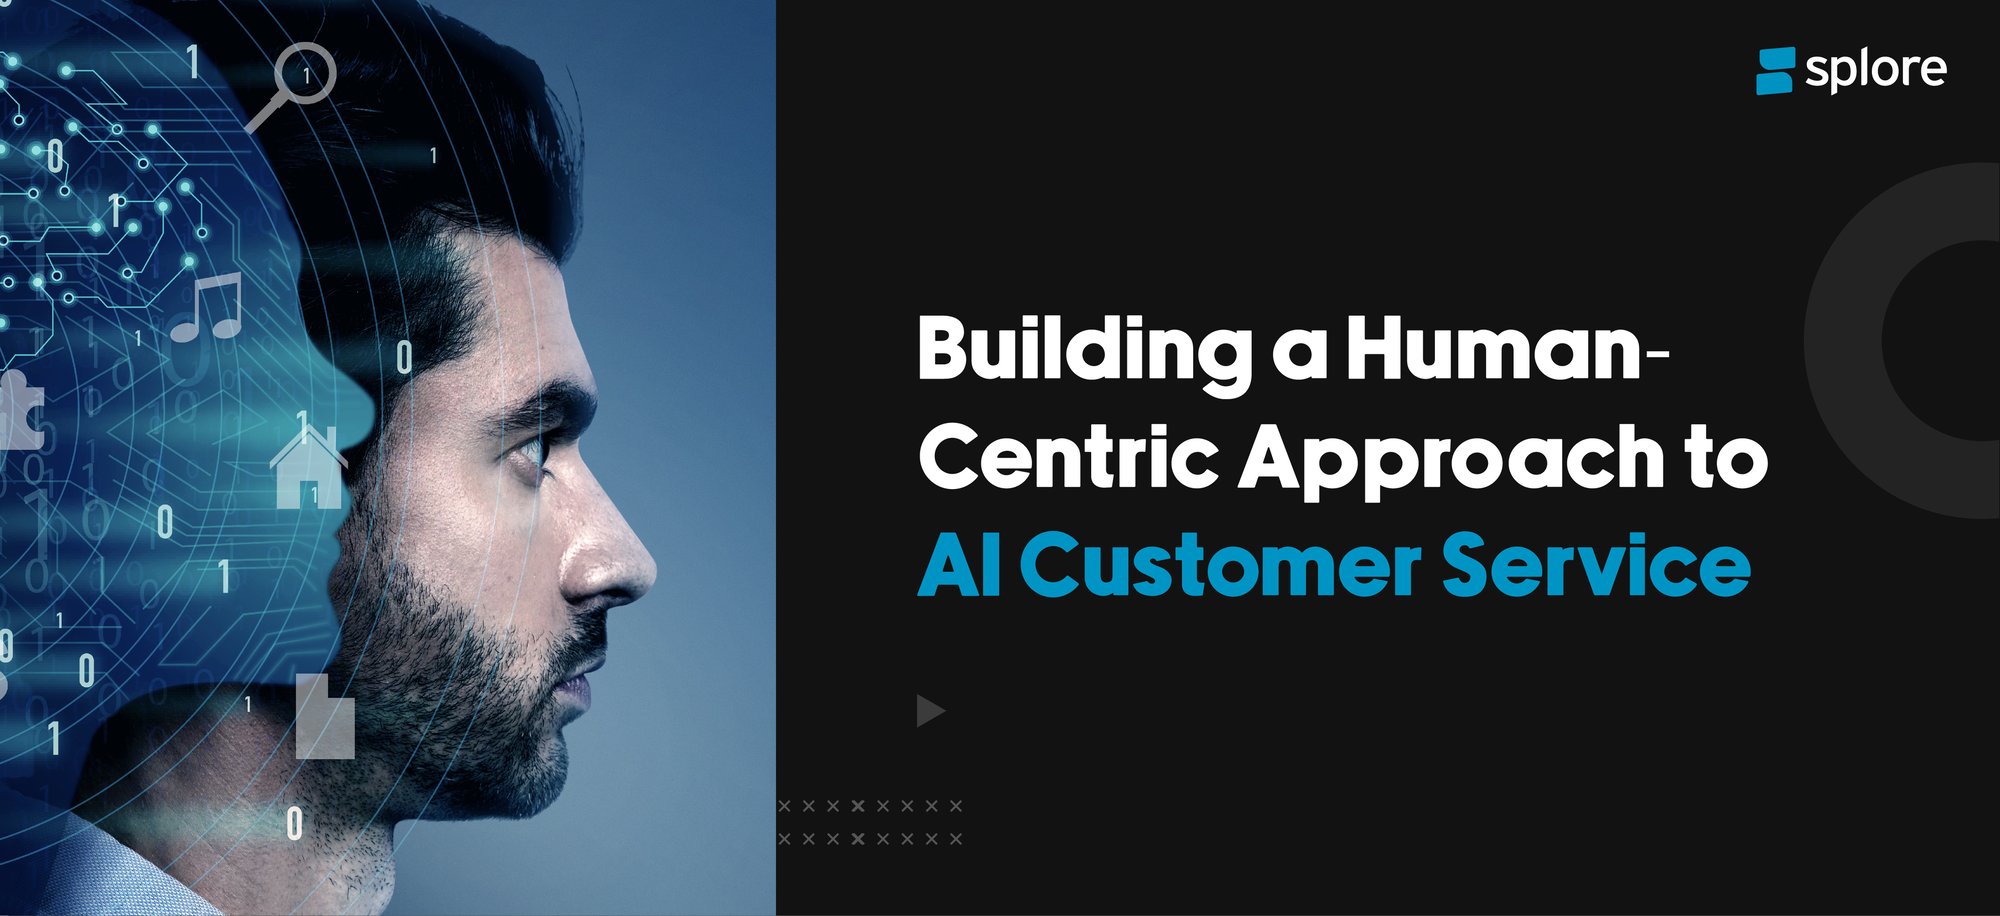 Building a Human-Centric Approach to AI Customer Service